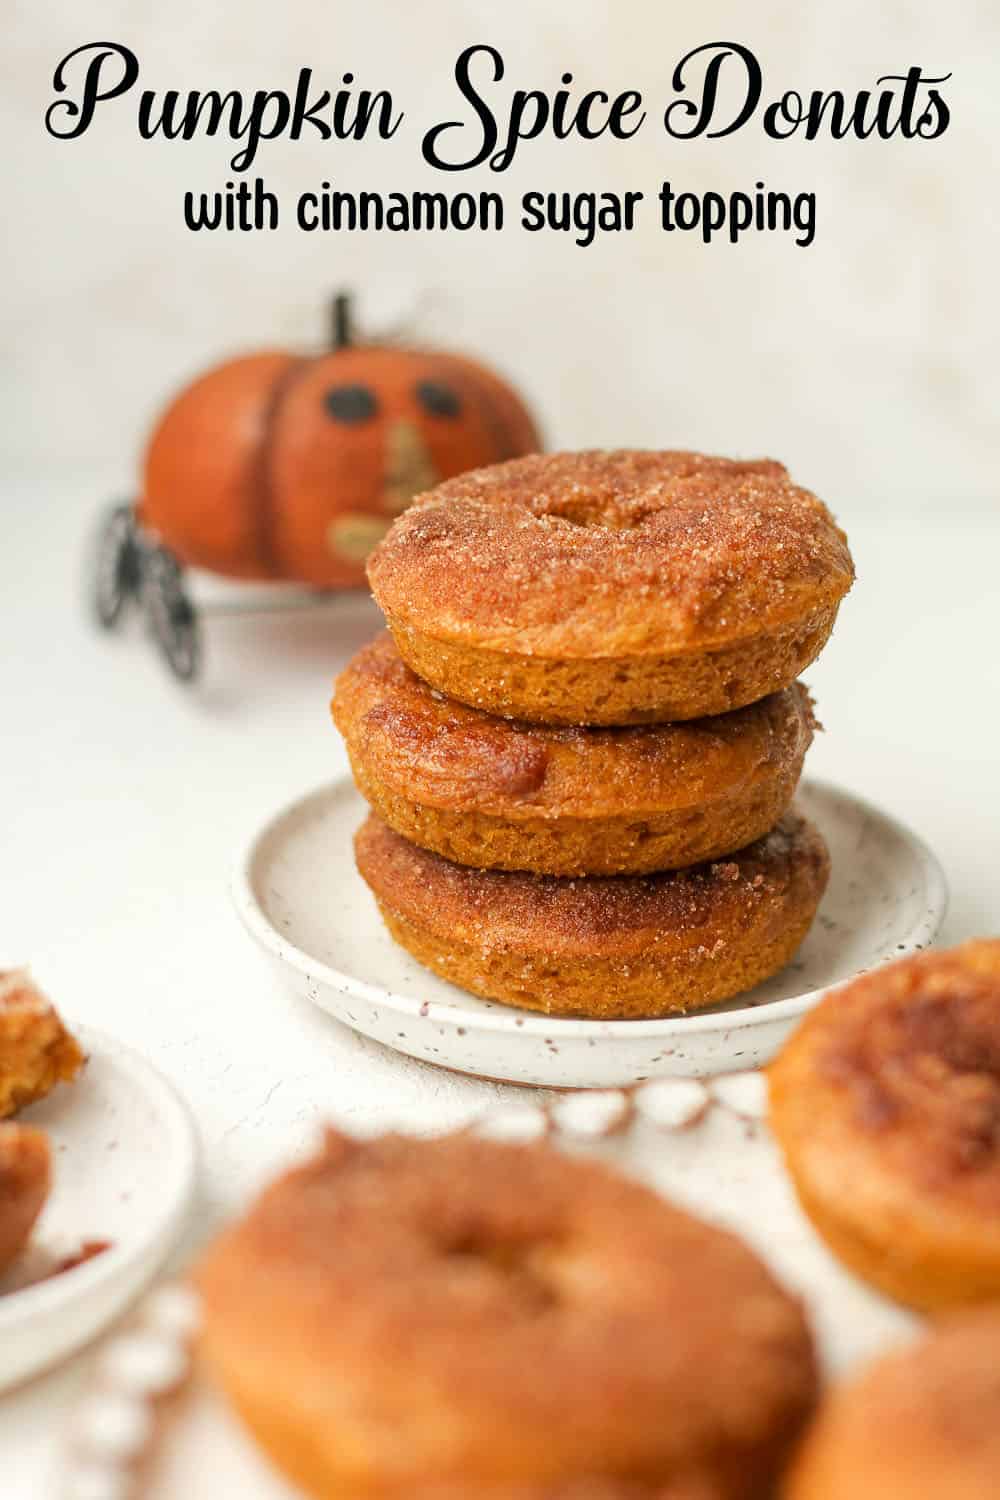 A small plate with three stacked pumpkin donuts with cinnamon sugar topping.